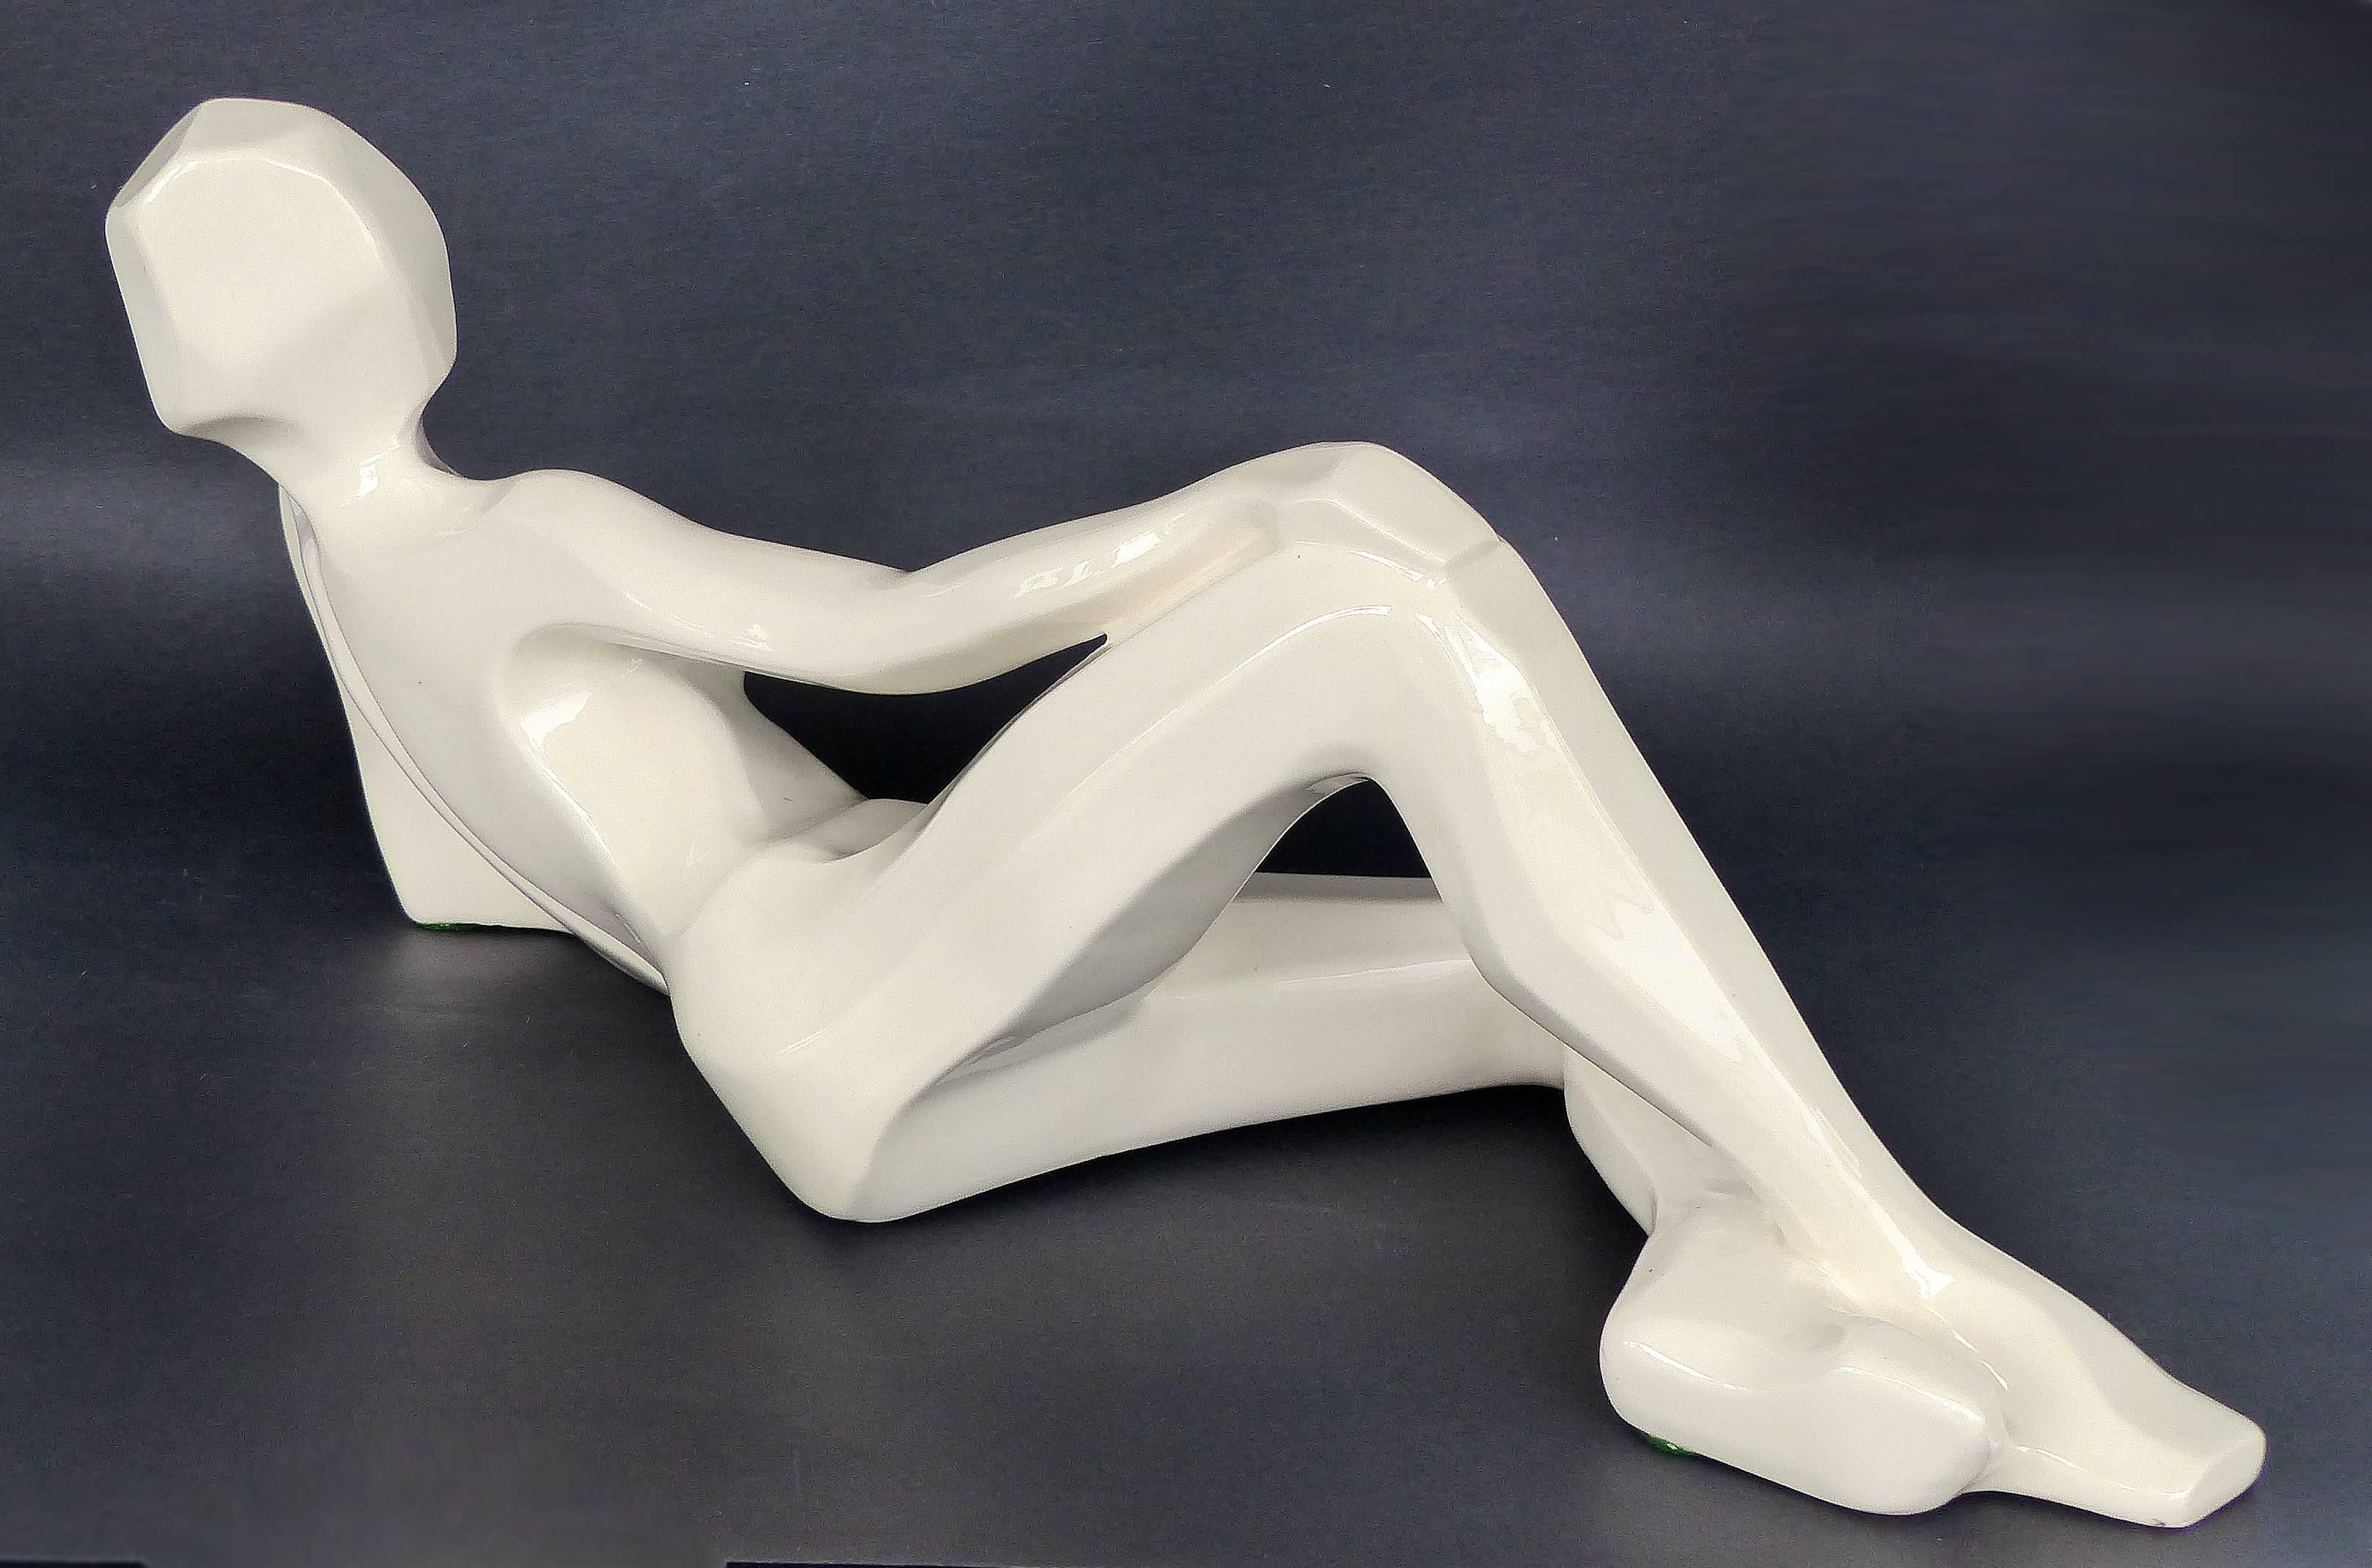 Mid-Century Modern Jaru Modernist Ceramic Reclining Figure, Dated 1976

Offered for sale is a modernist ceramic statue of a reclining nude signed Jaru and dated 1976.